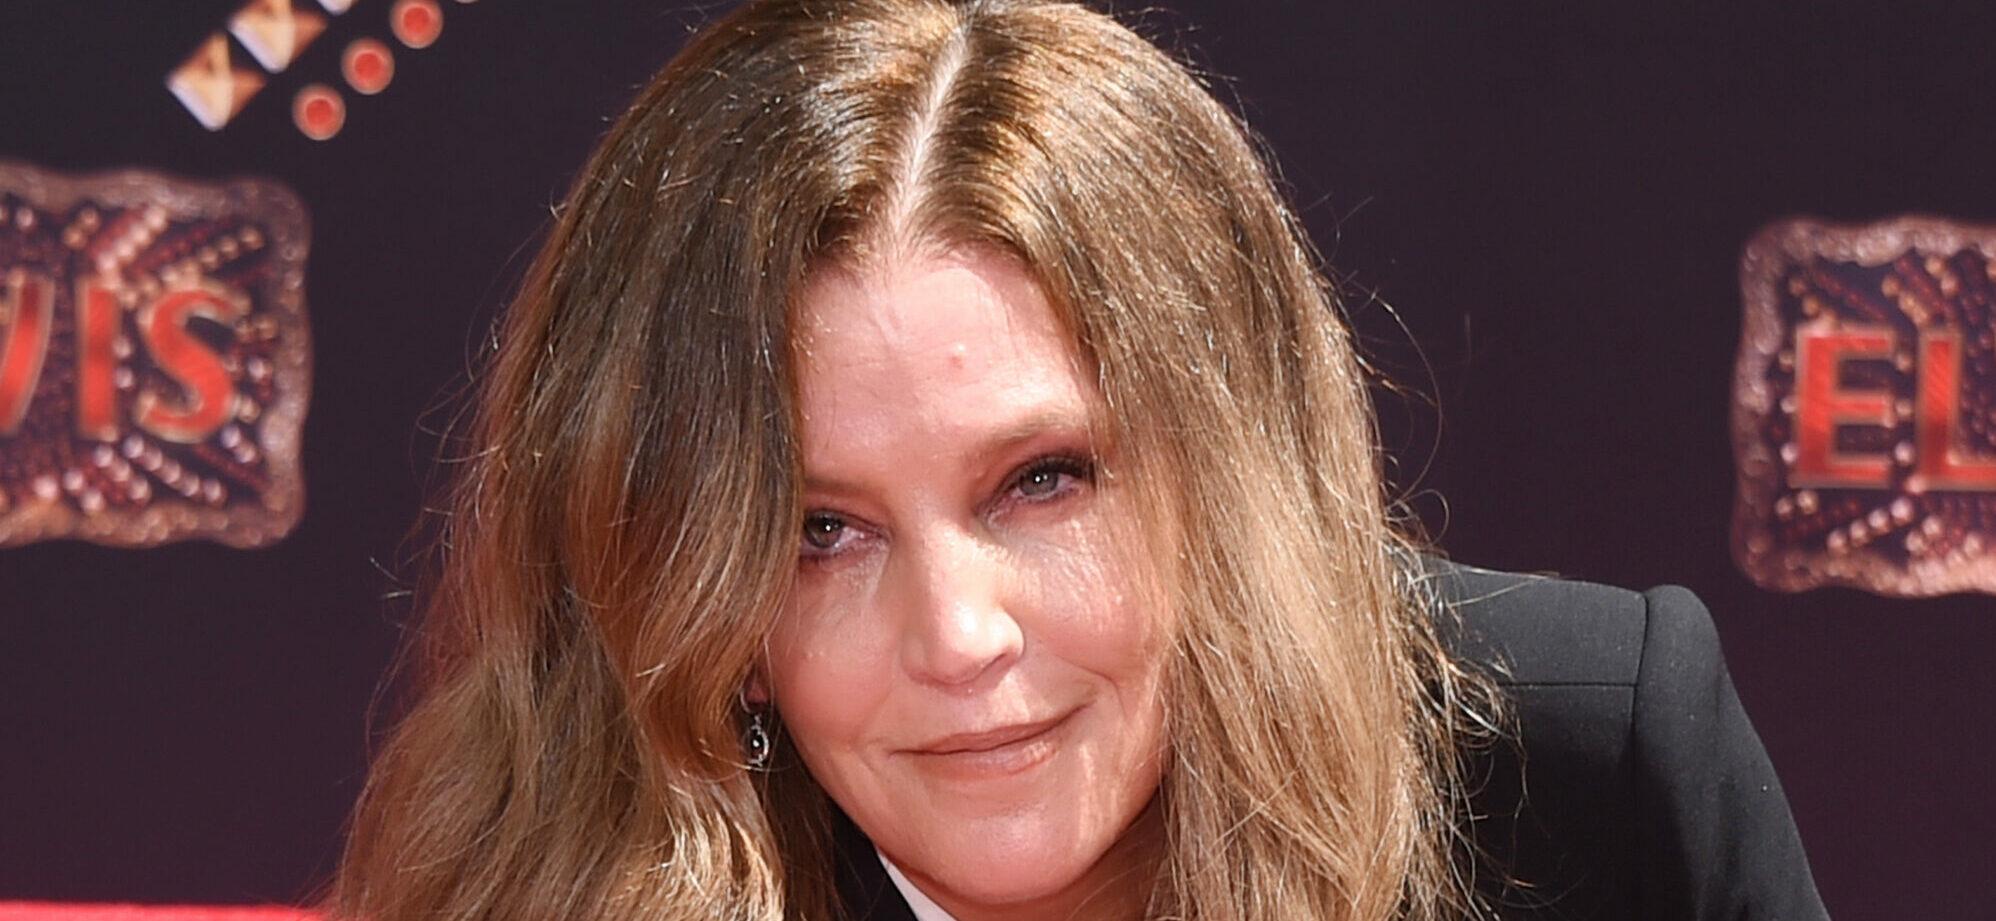 Lisa Marie Presley’s Ex-Husband Pleaded With 9-1-1 Dispatch Before Her Death